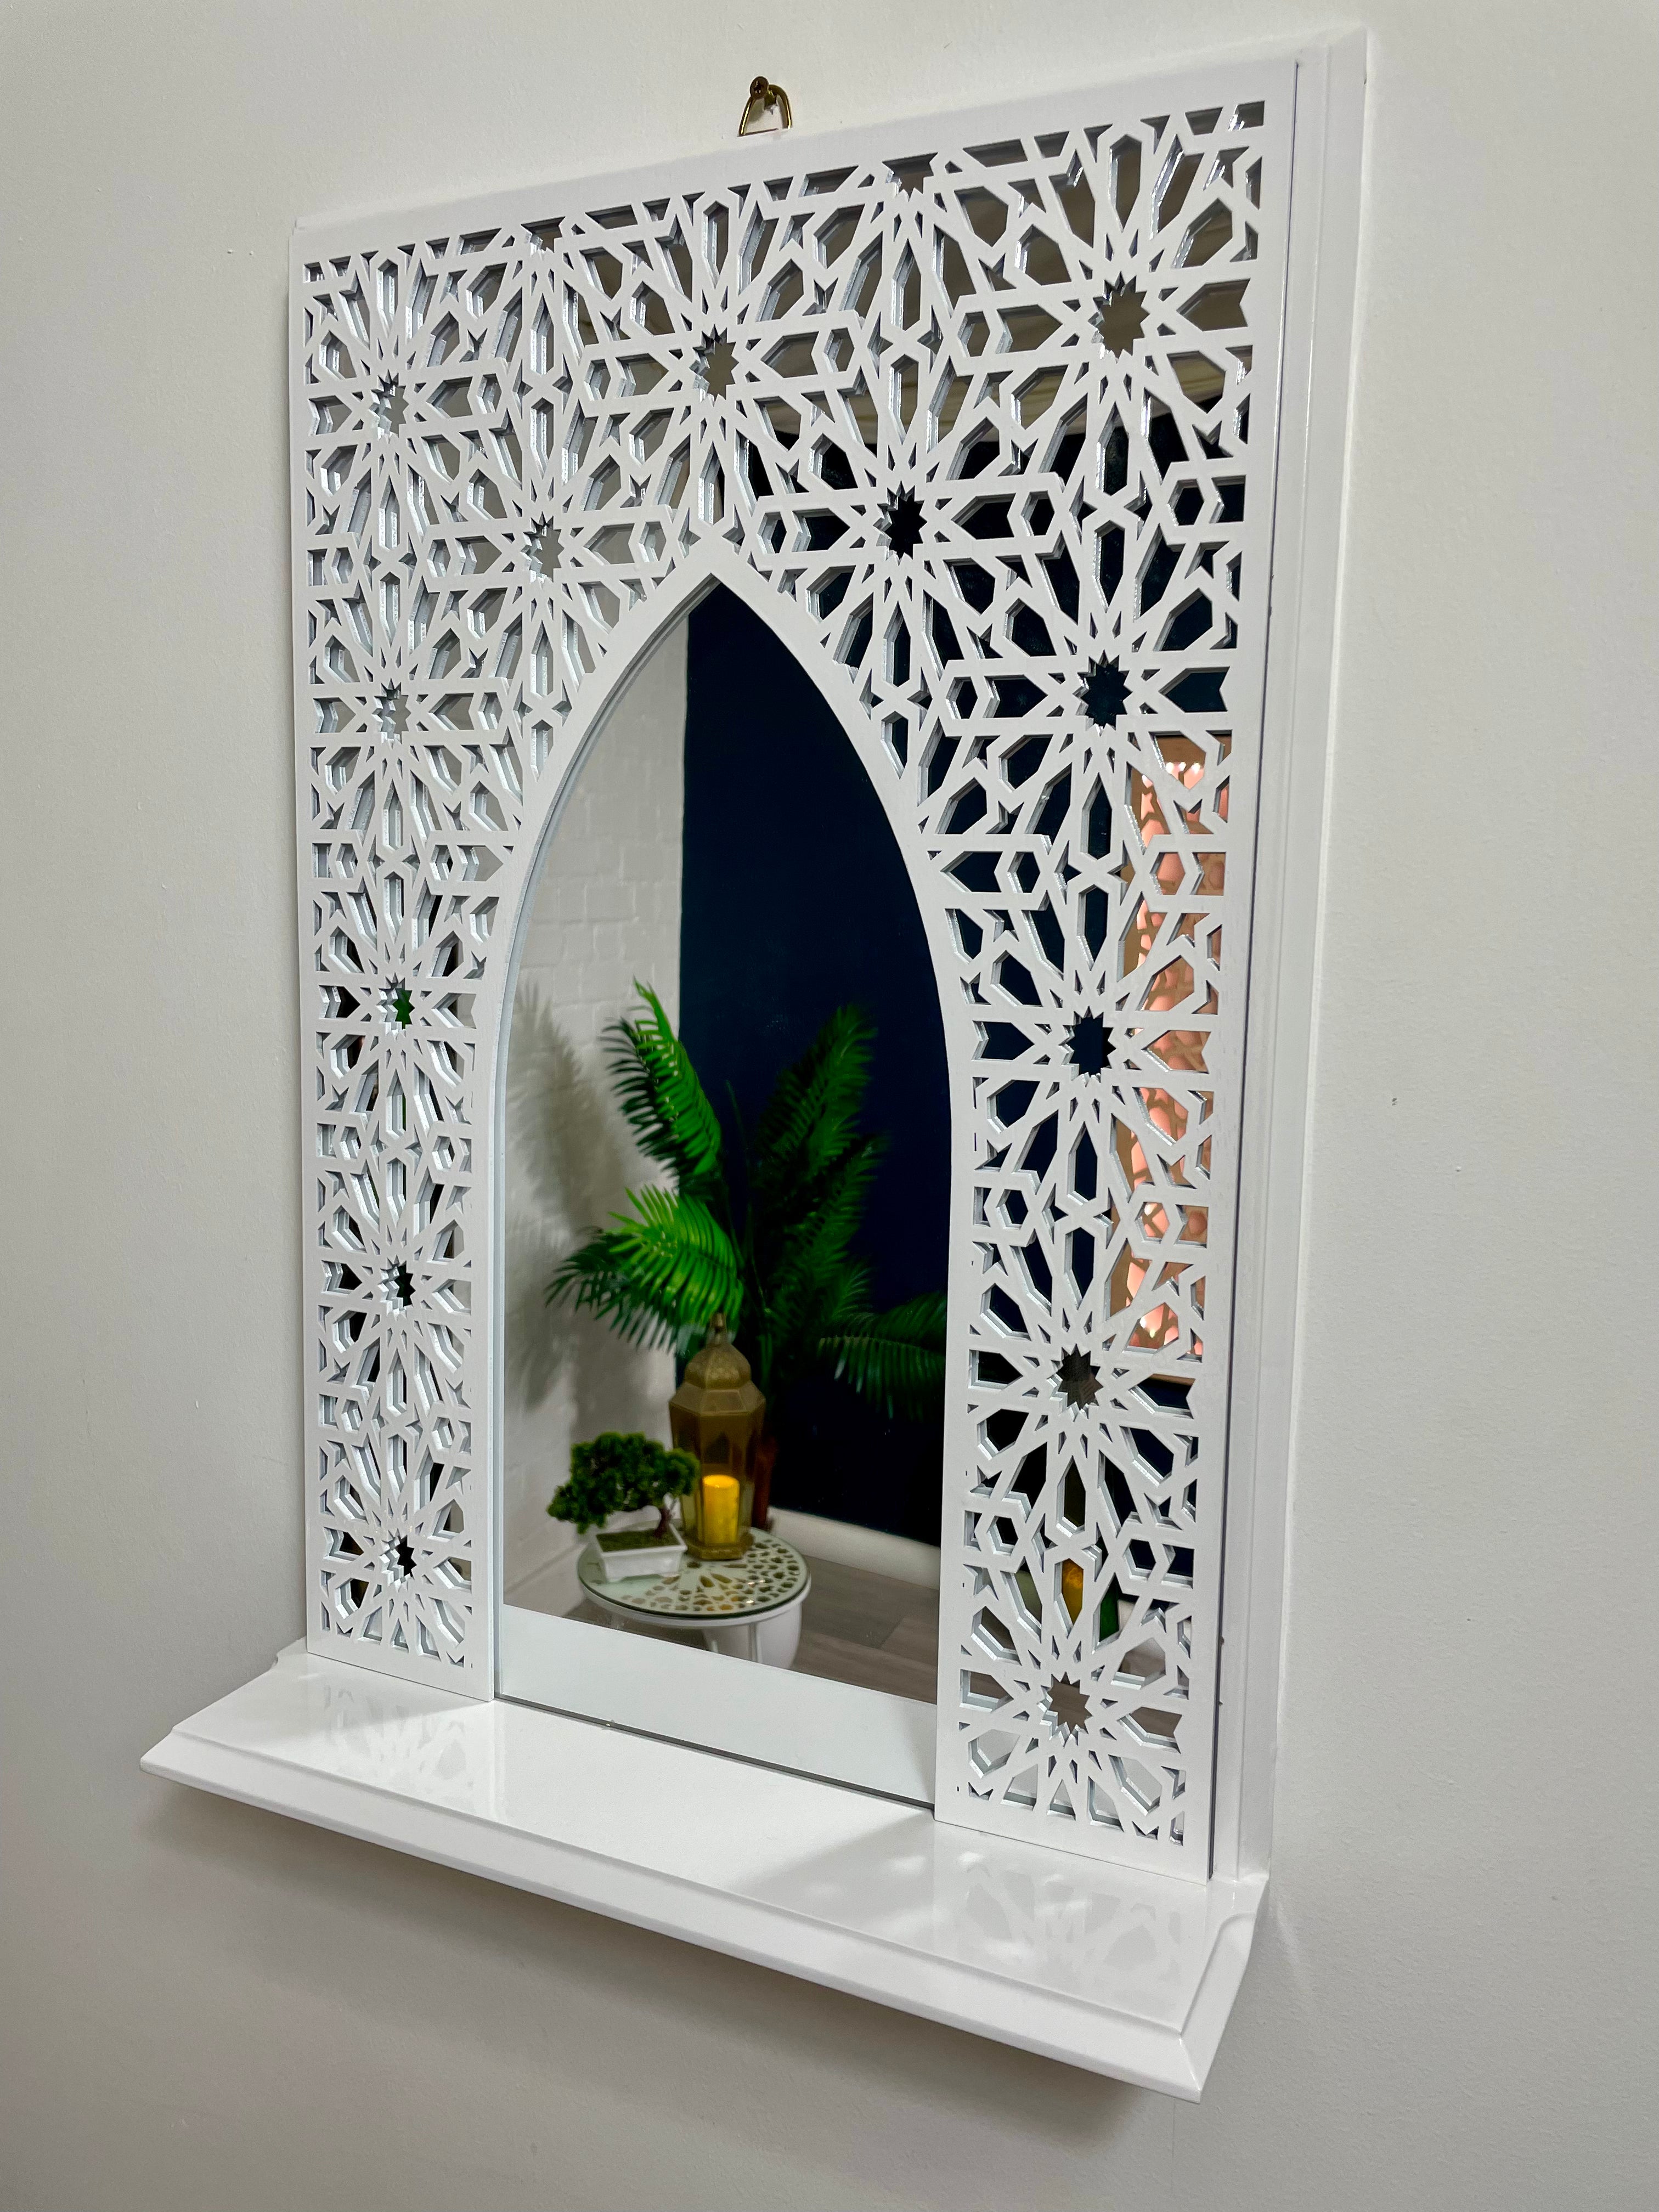 White Moroccan Arch Mirror Shelf  with Acrylic Mirror Safe for Kids Room